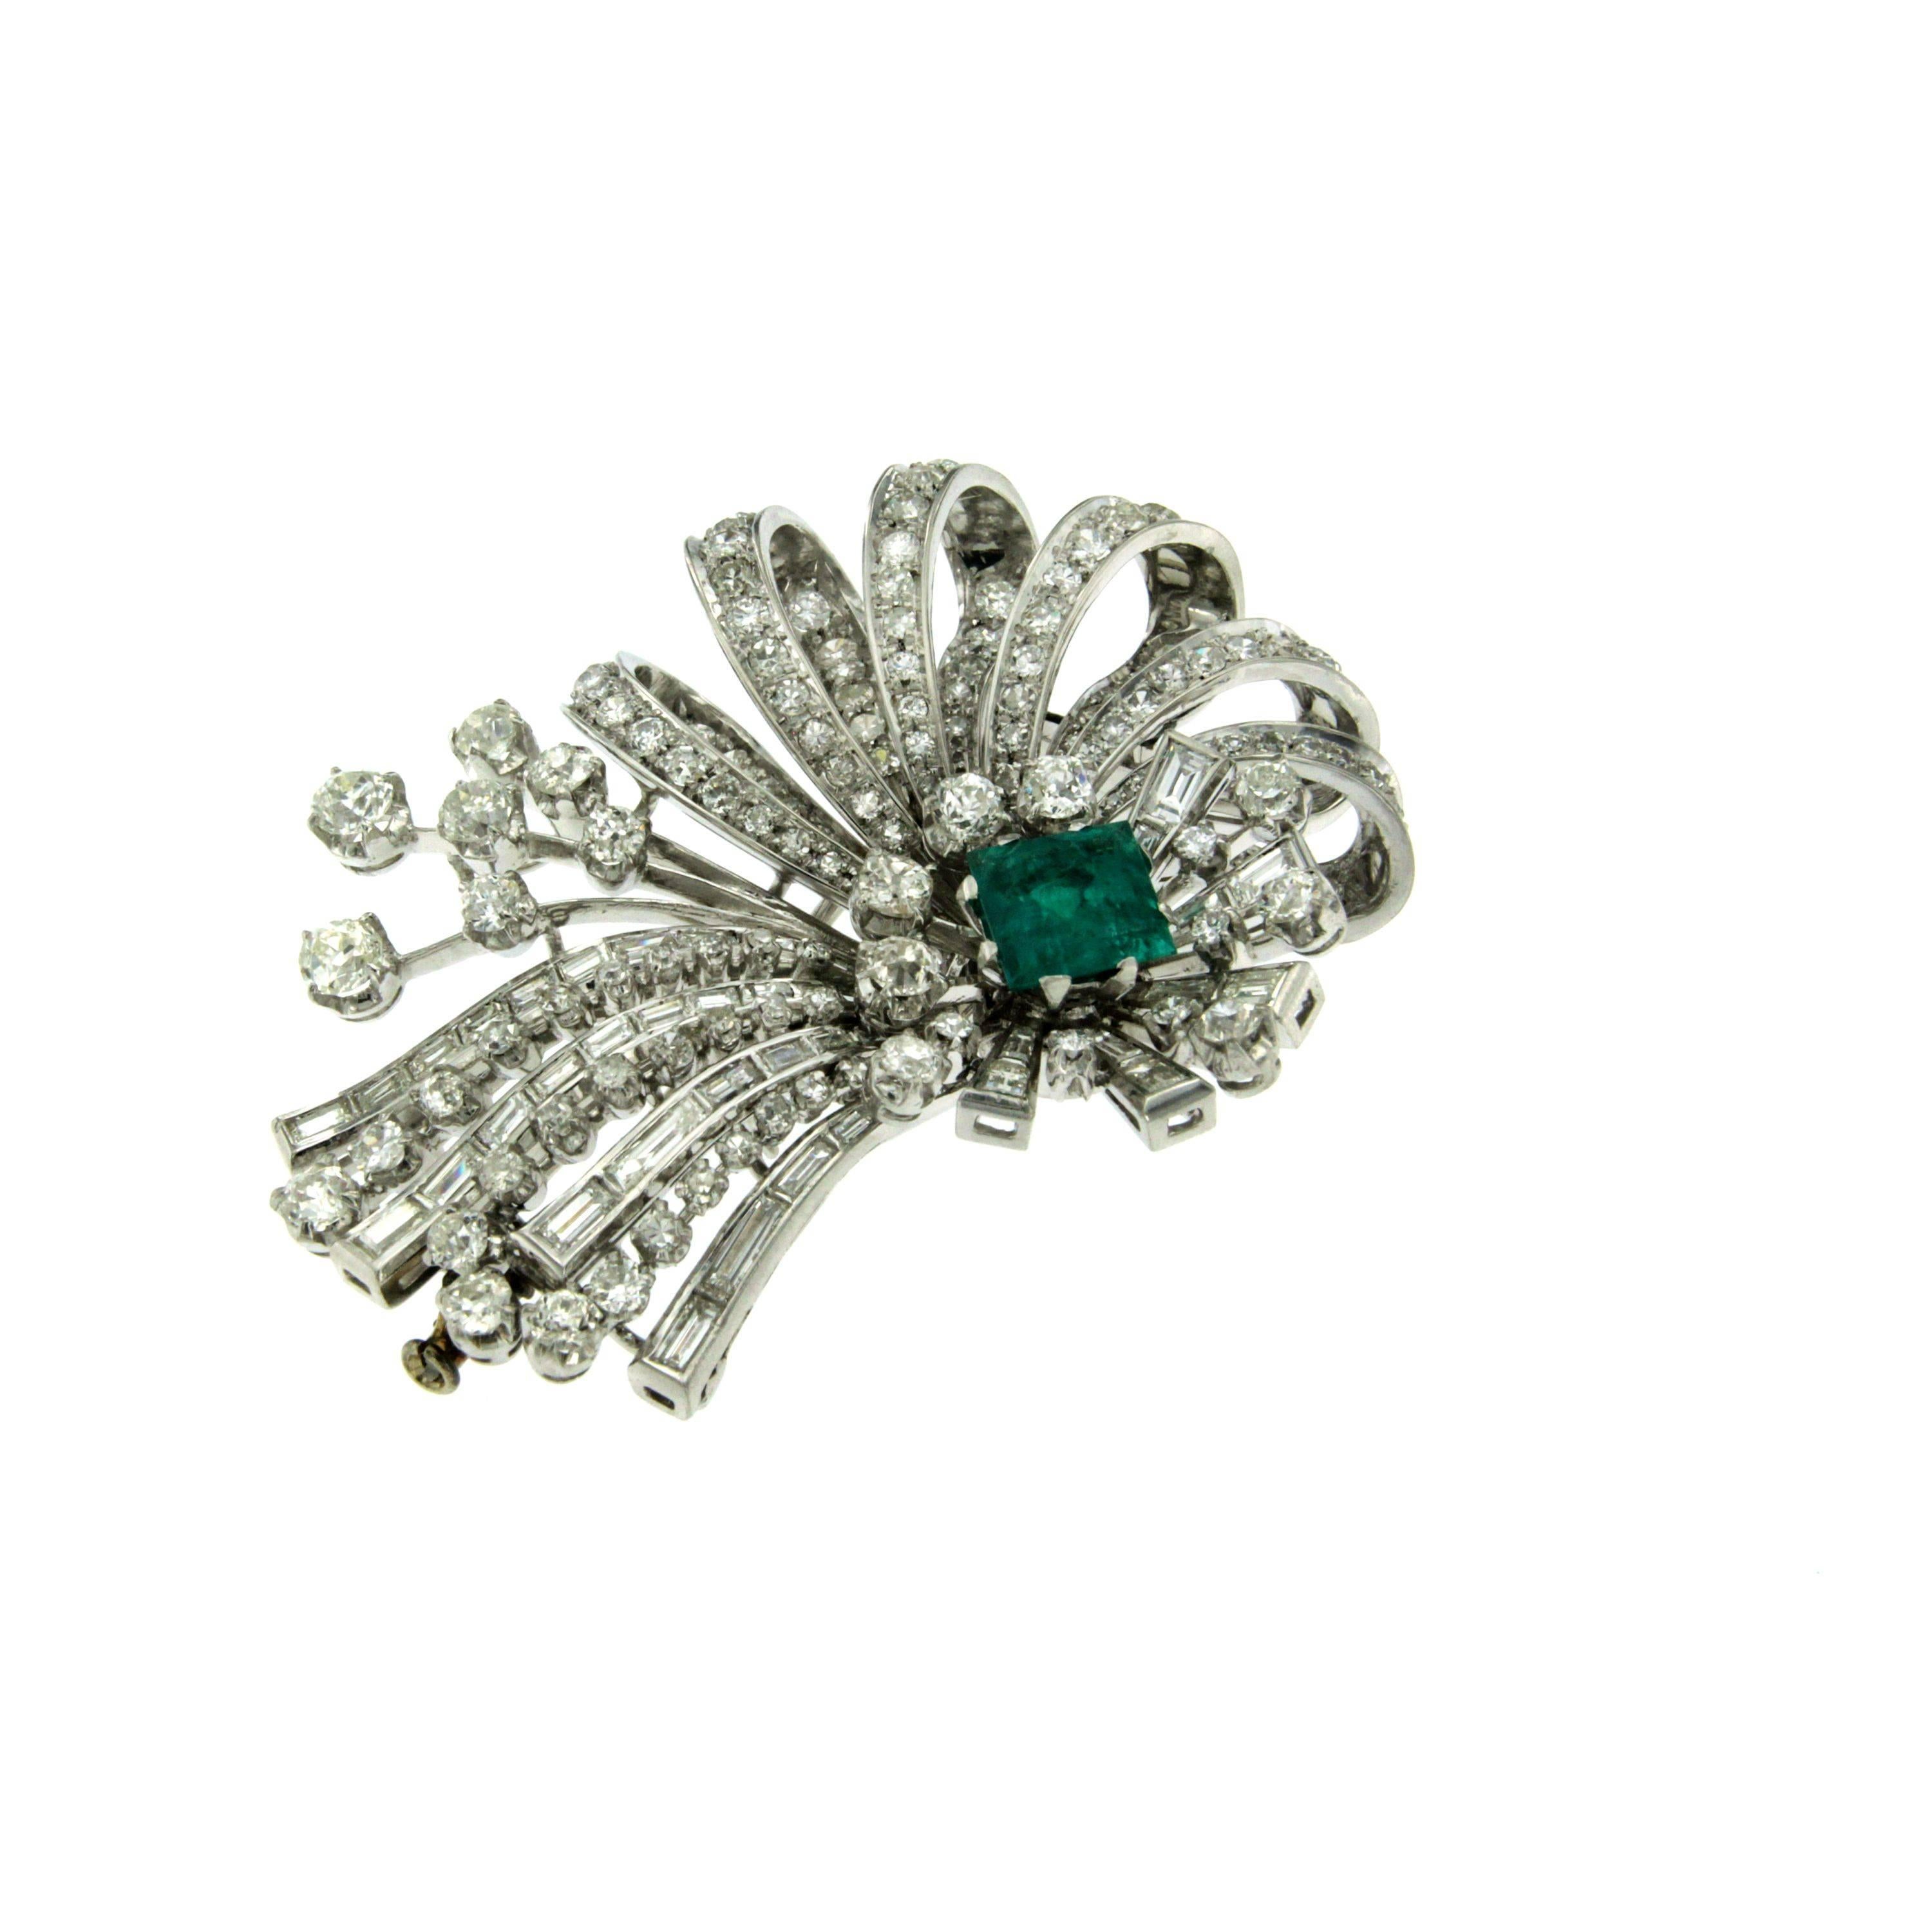 A fabulous Art Deco flower brooch set with a Colombian Emerald weighing approx. 3.50ct and round/baguette cut diamonds weighing approx.10.00 total carats. 
Handmade Platinum mounting; 
This piece is designed and crafted entirely by hand in the